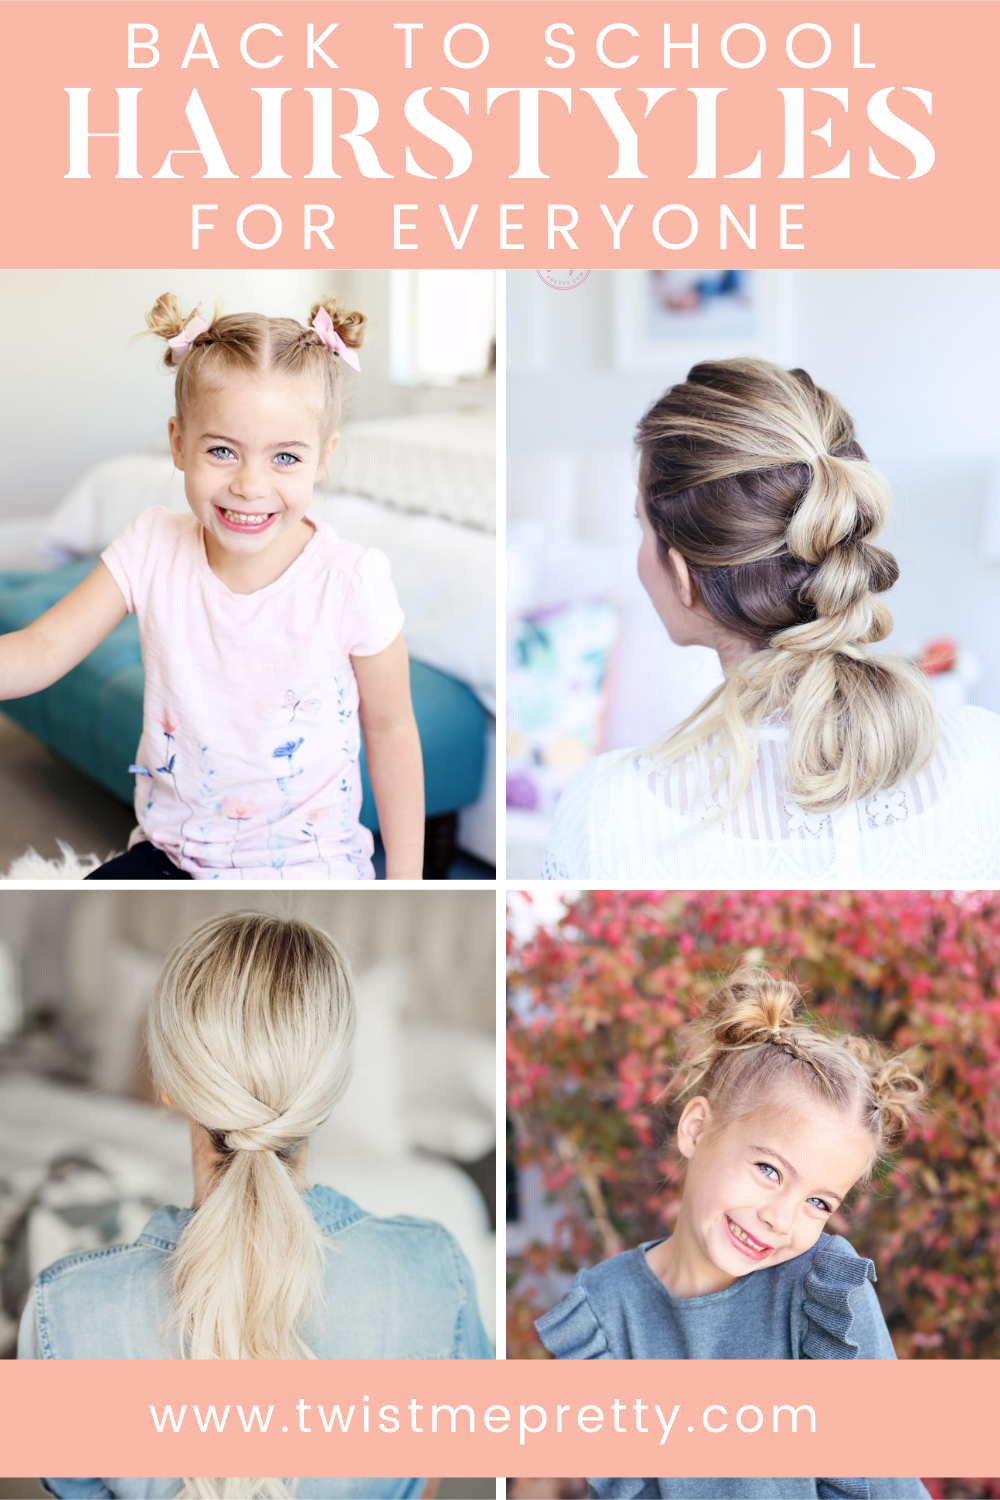 Braids for Kids - 100 Back to School Braided Hairstyles for Kids in 2020 |  Braids for kids, Black kids braids hairstyles, Cute hairstyles for kids